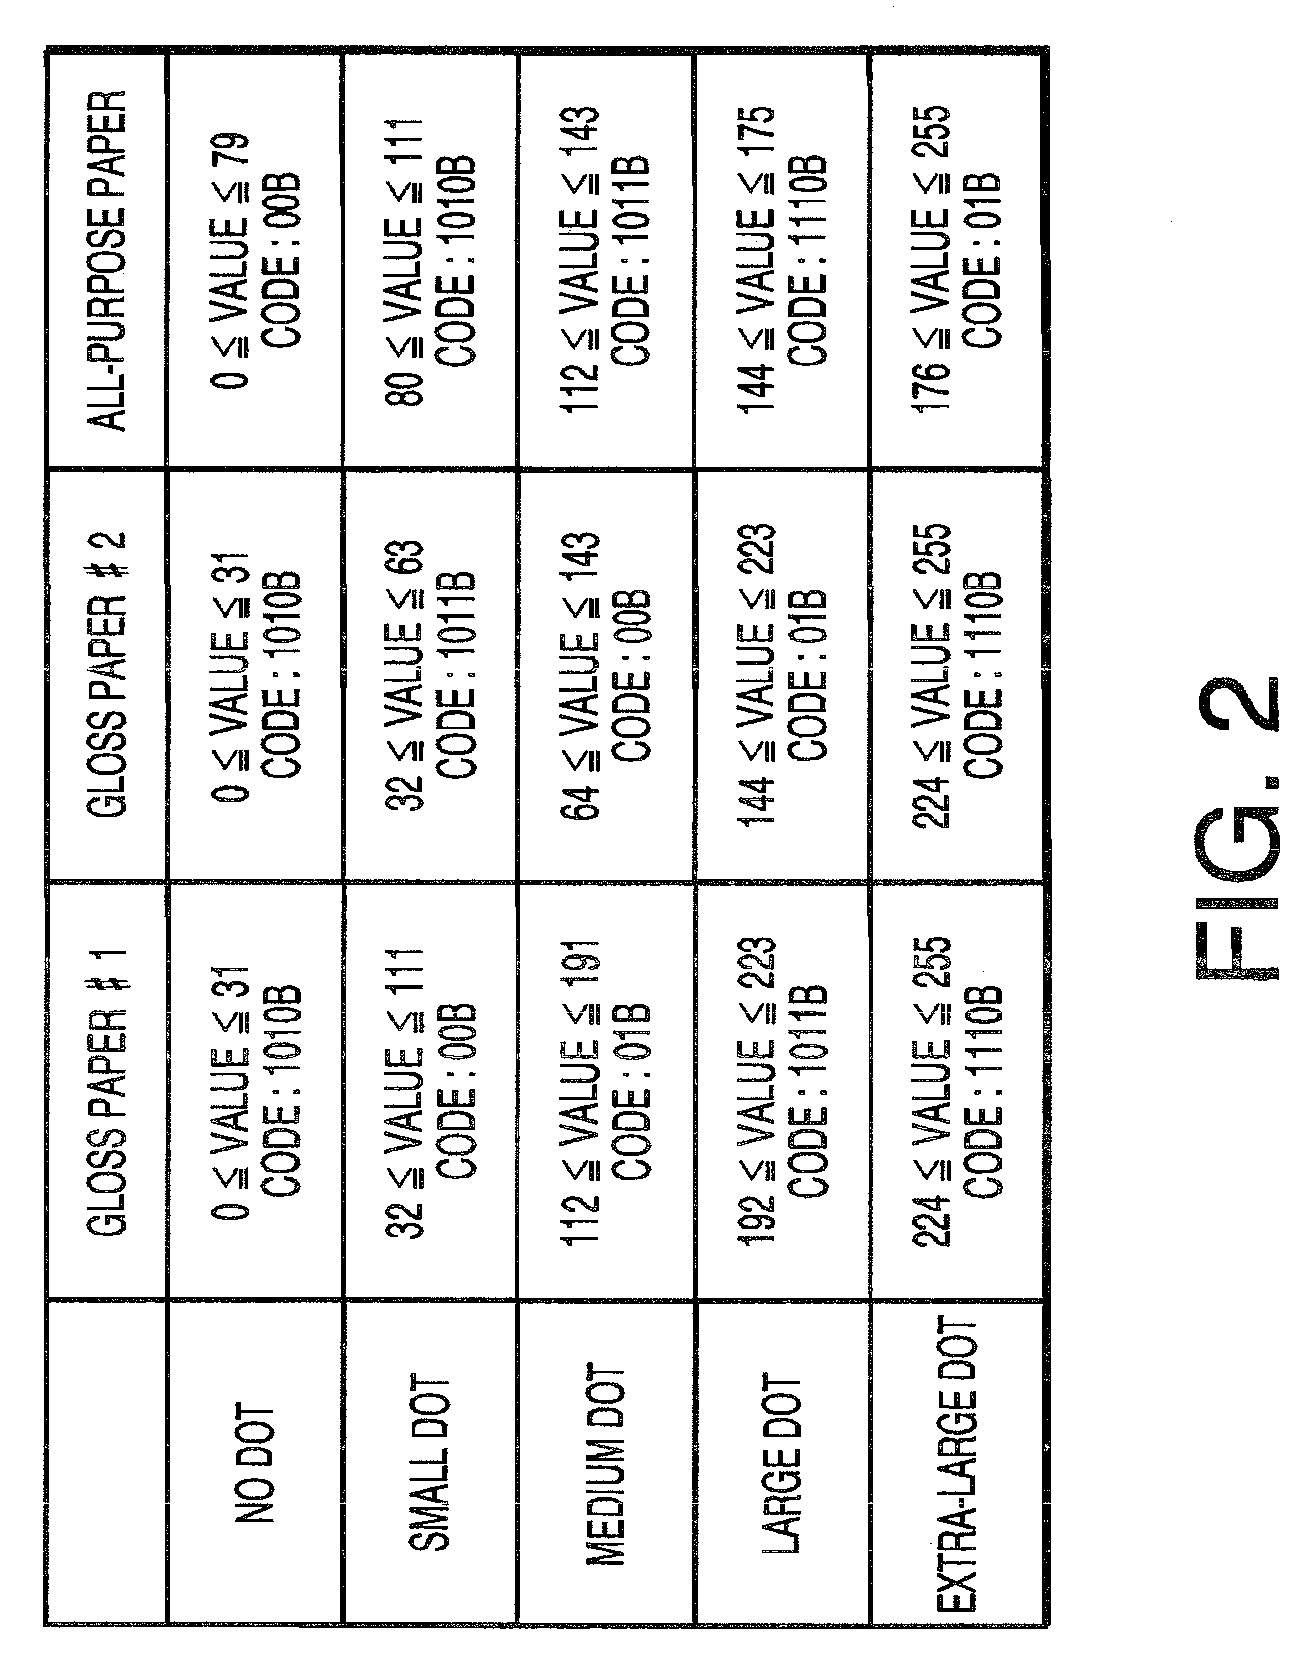 Image processing device and system for generating coded image data